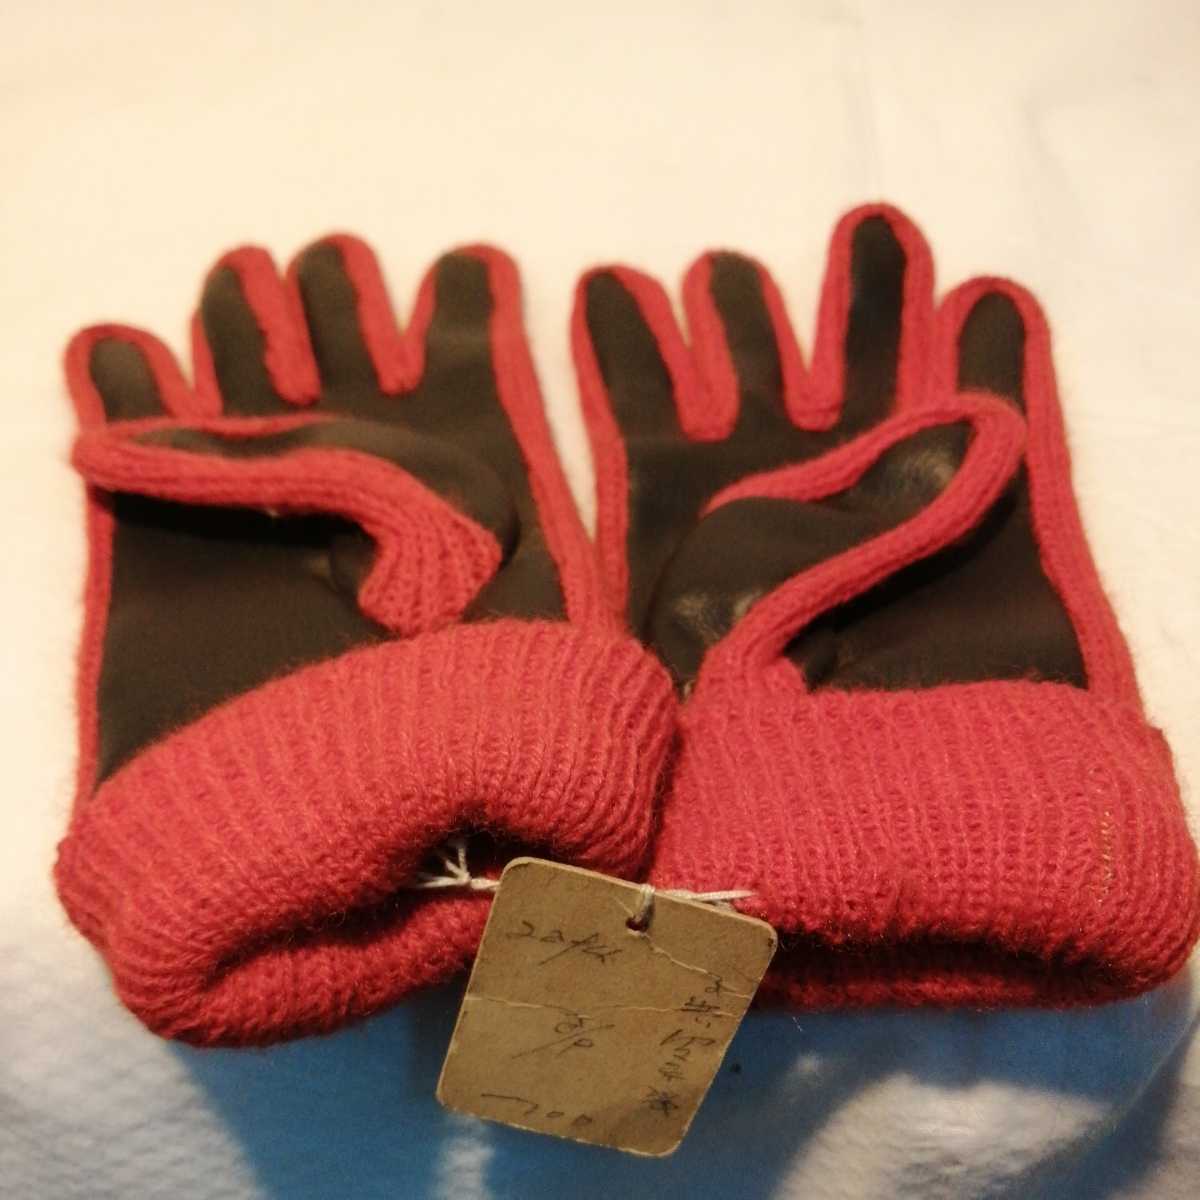  unused goods Yusei boy papii gloves anime manga for children red / black color Showa era antique postage 185 jpy other 